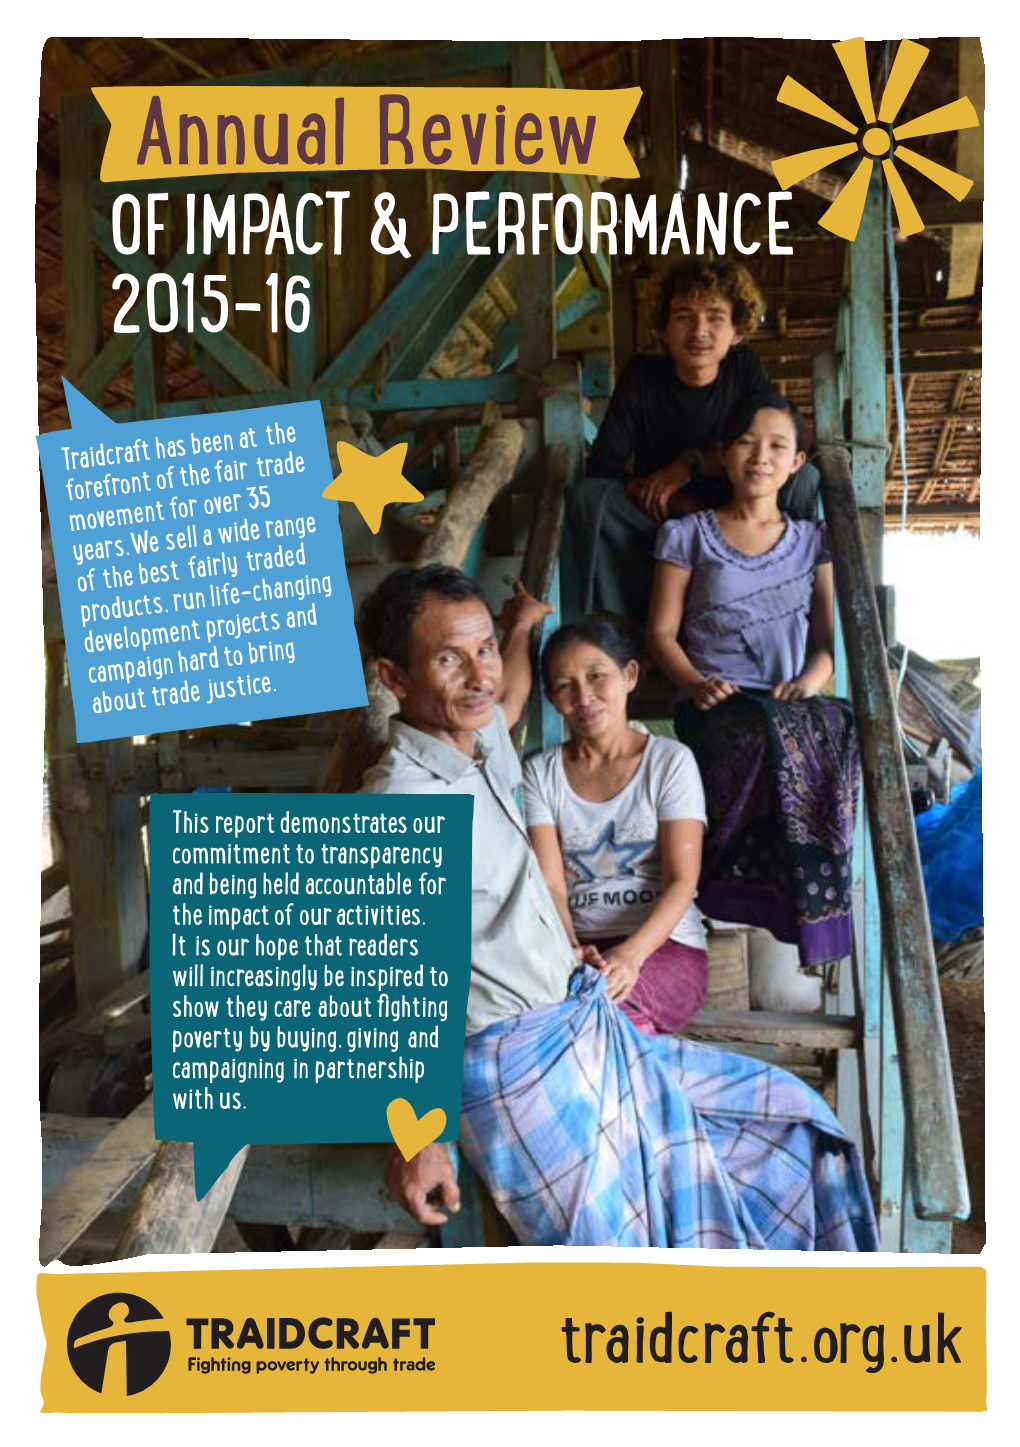 Annual Review of IMPACT & PERFORMANCE 2015-16